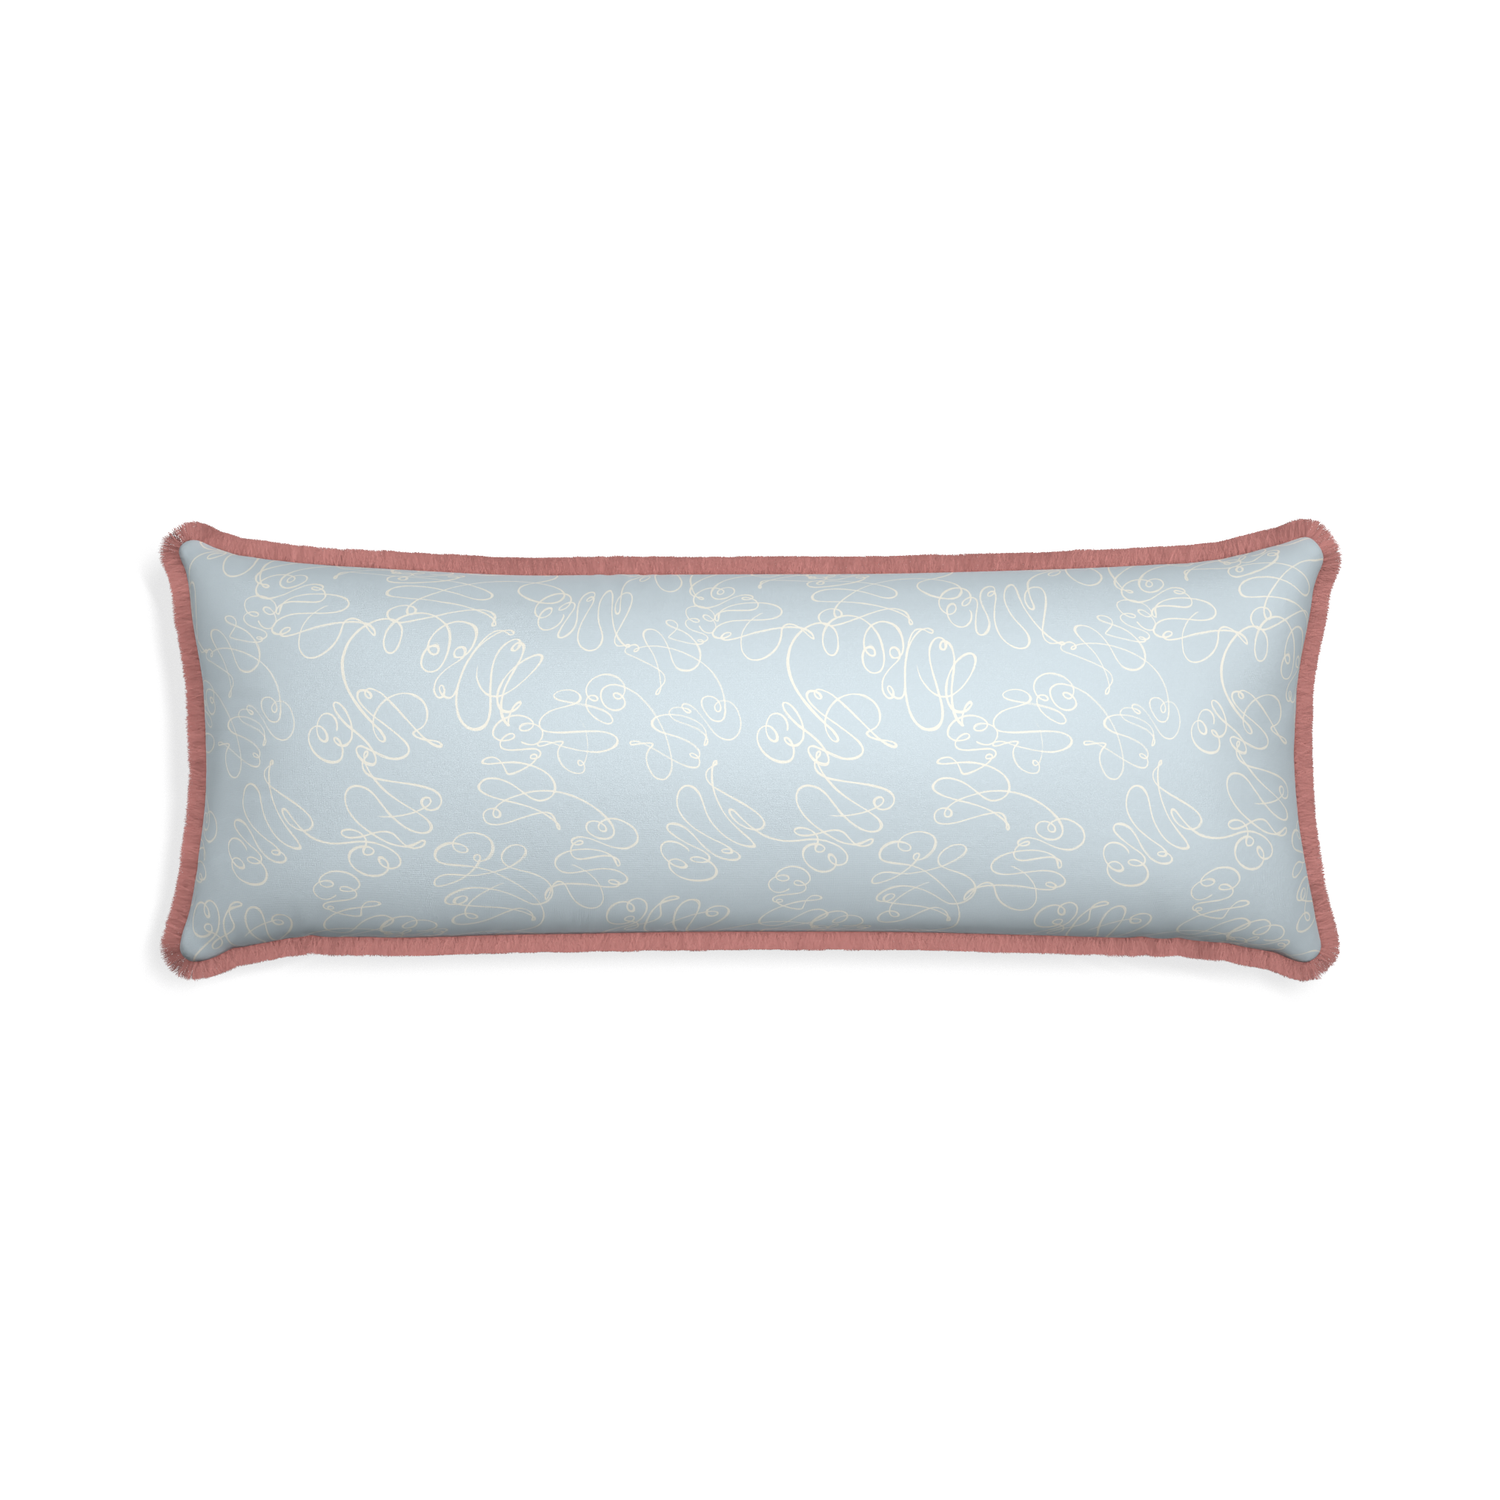 Xl-lumbar mirabella custom powder blue abstractpillow with d fringe on white background